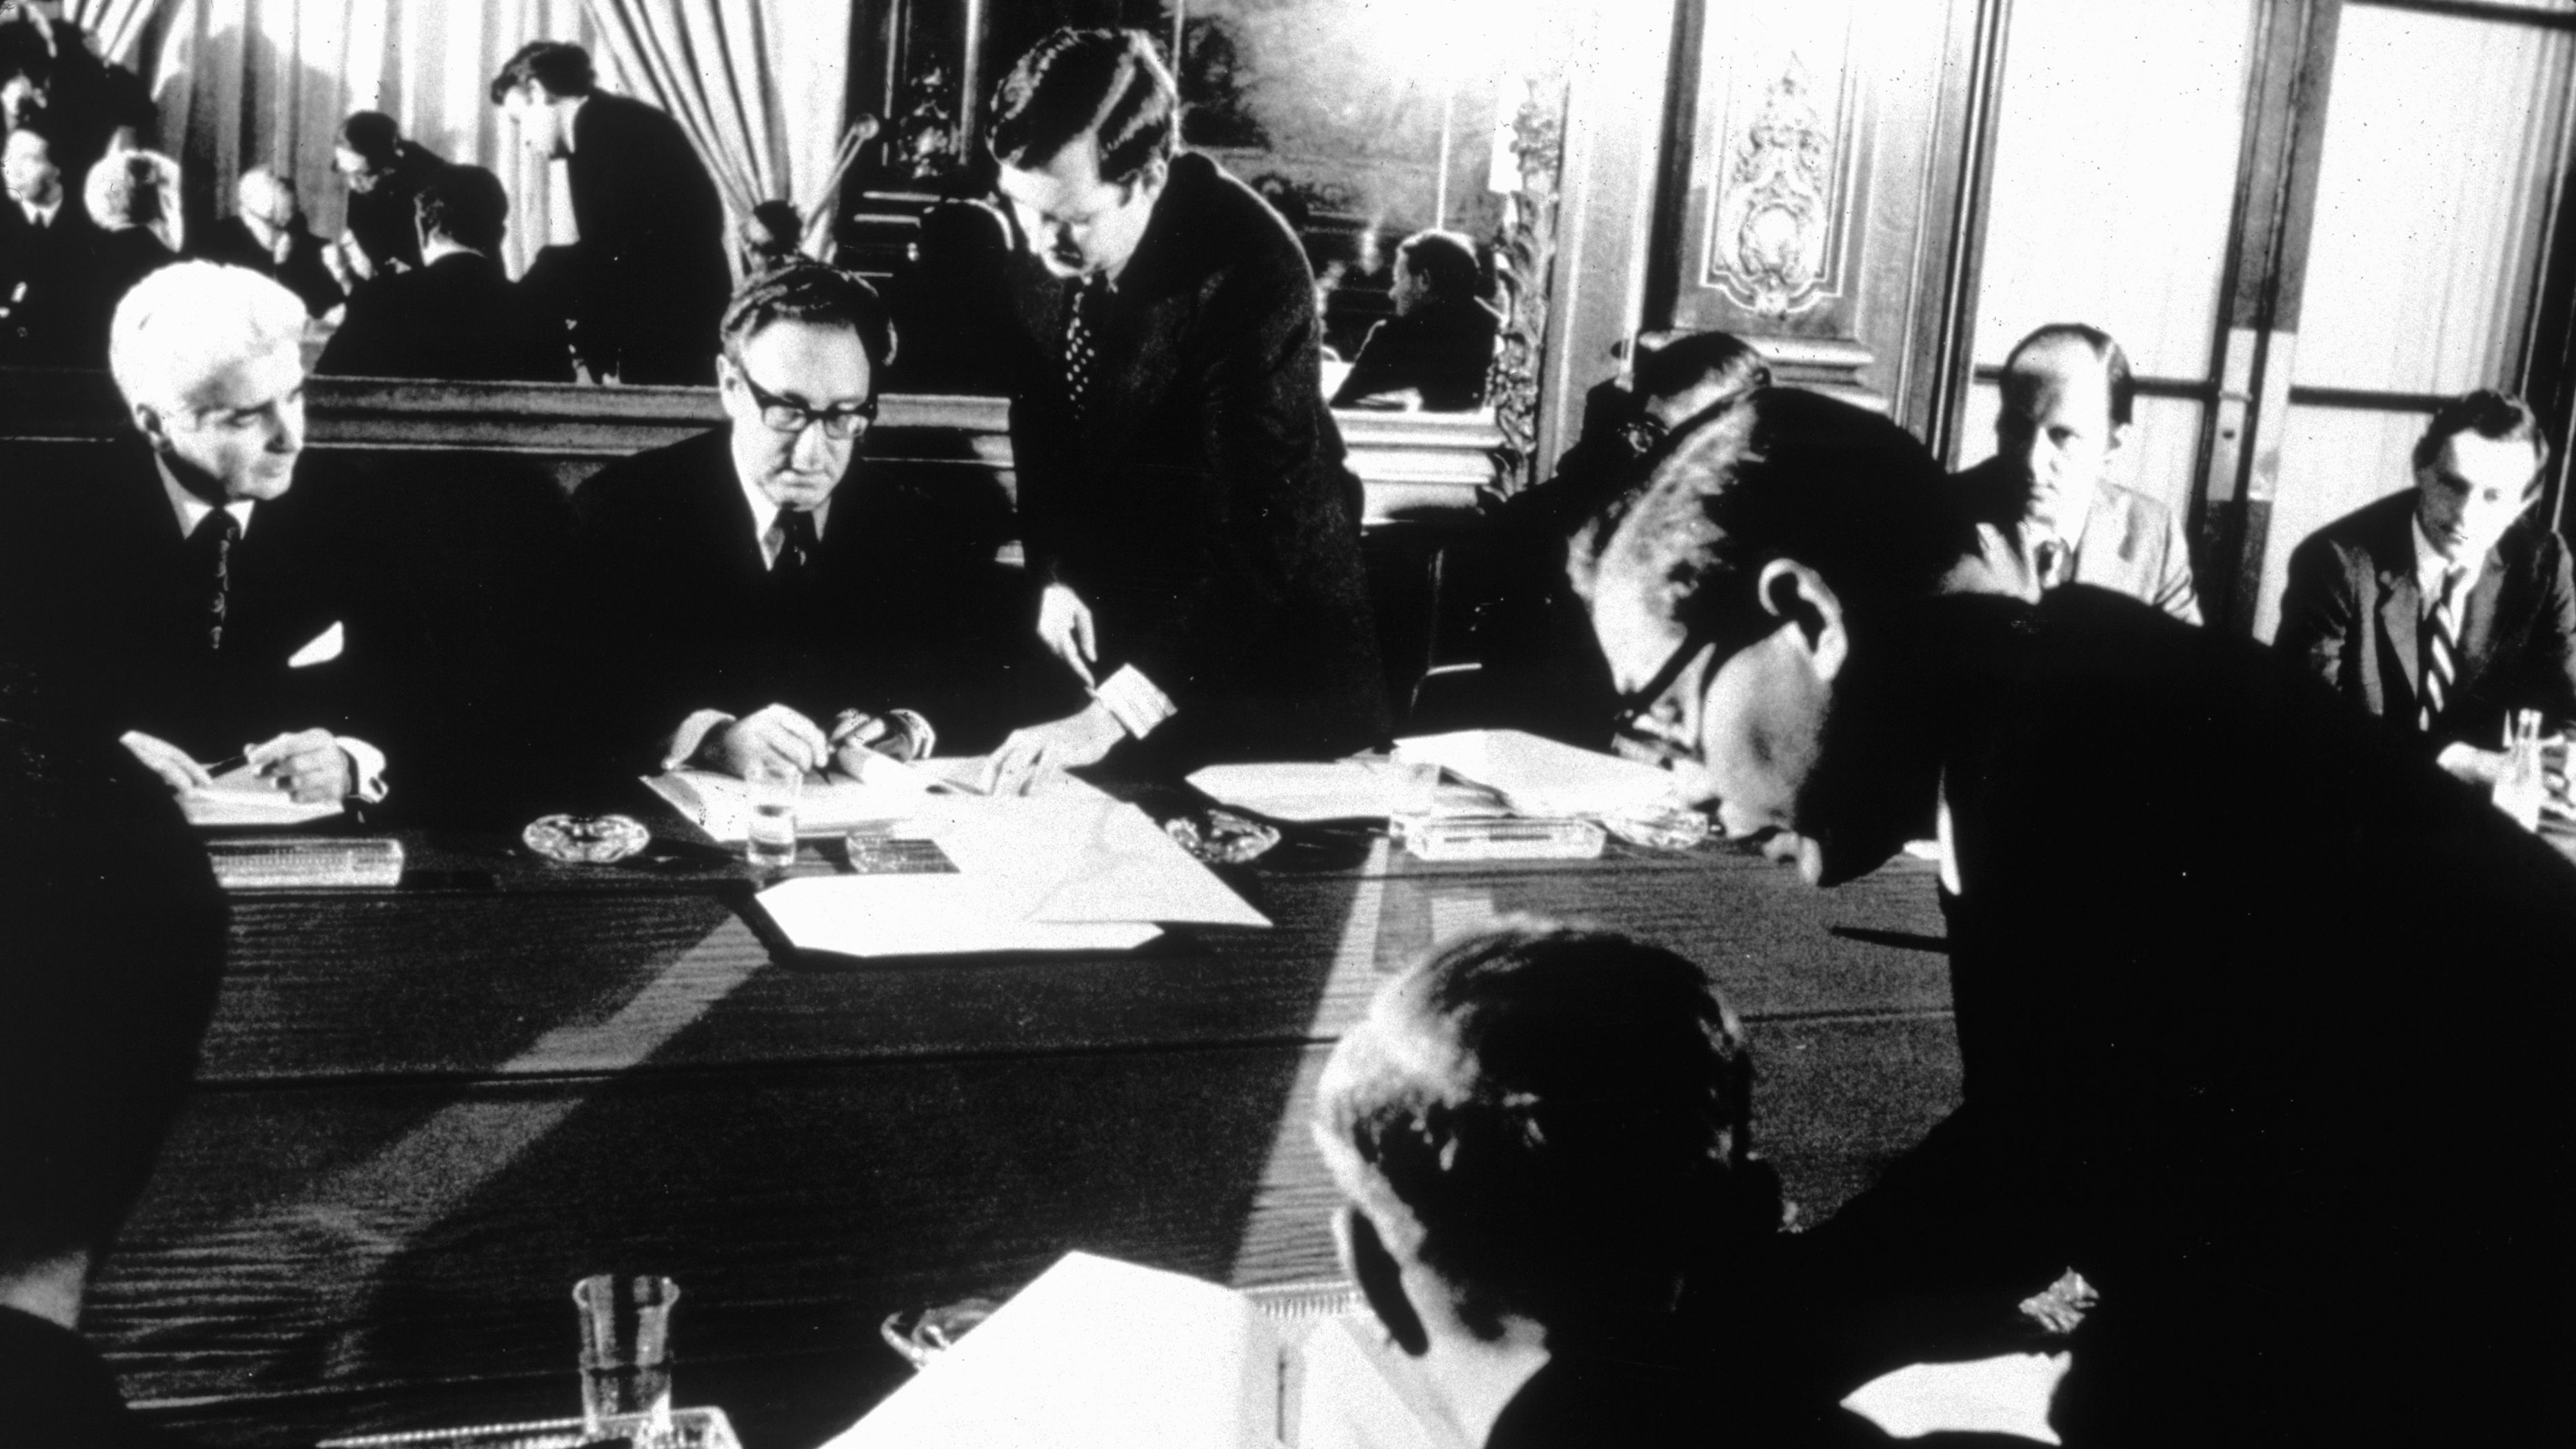 Kissinger and Vietnamese politician Le Duc Tho sign the Paris Peace Accords in 1973. The two men later were awarded the Nobel Peace Prize, but Tho refused to accept it.